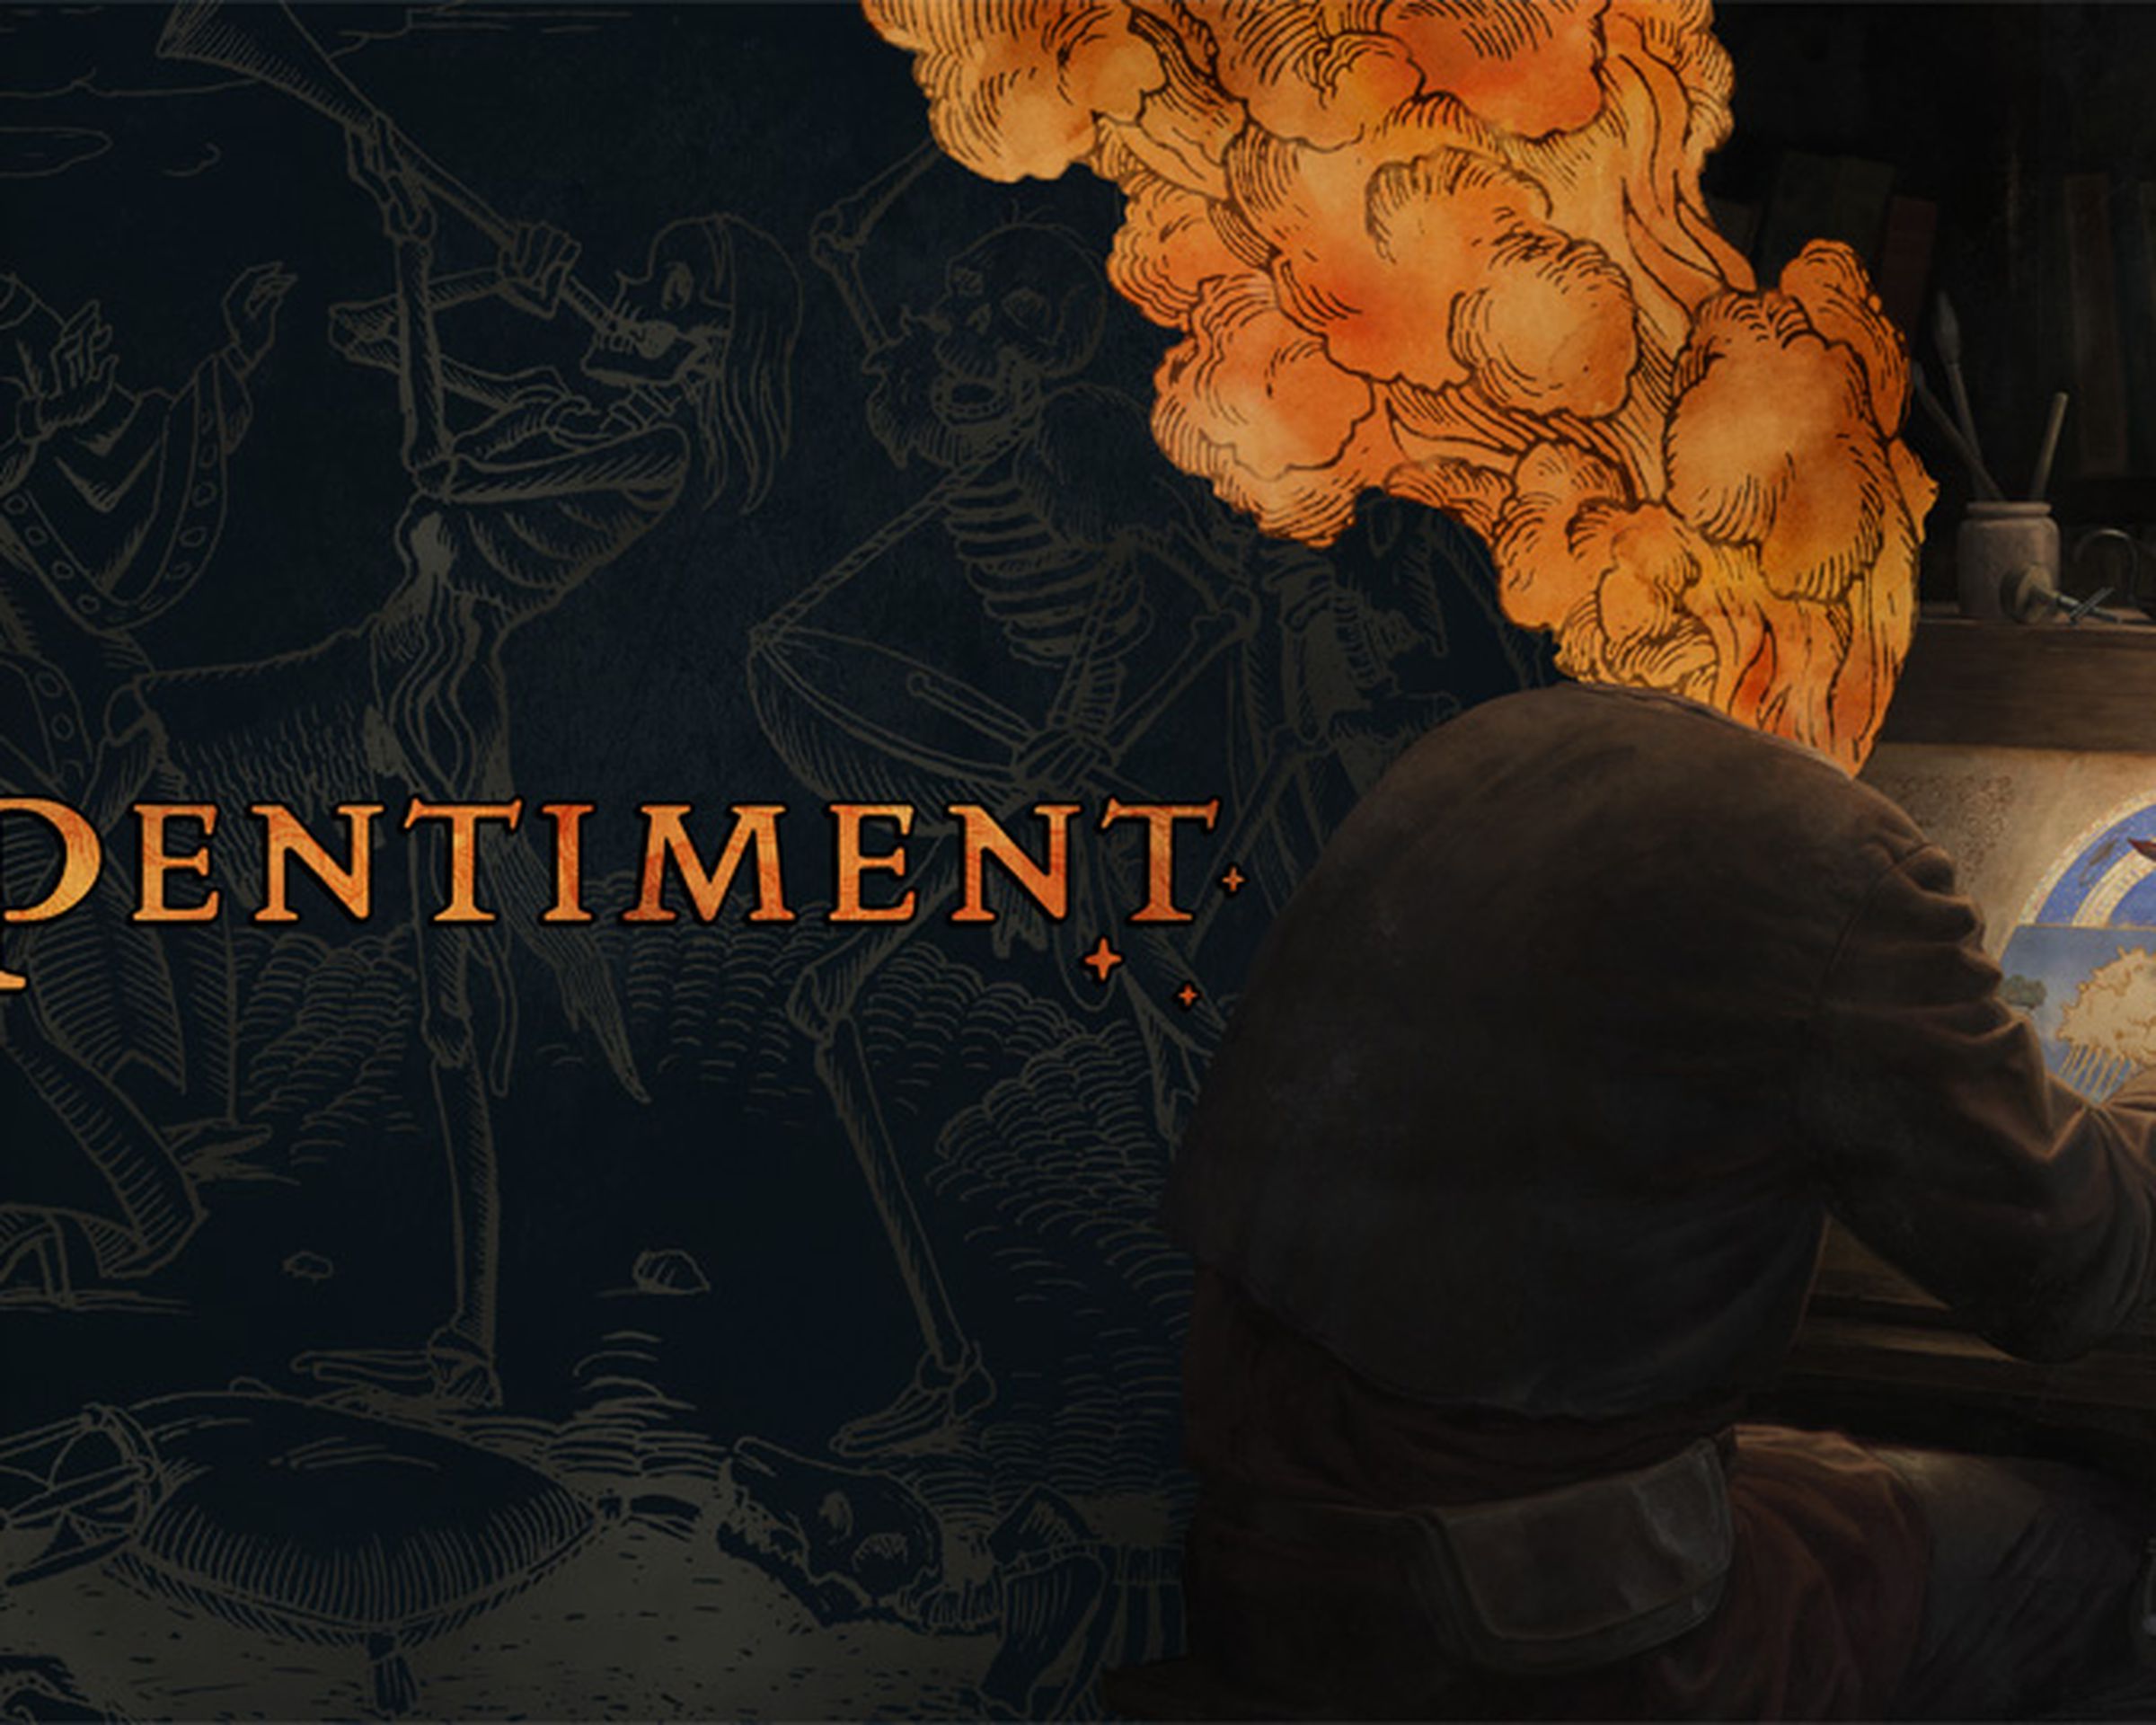 Graphic from the video game Pentiment featuring an artist with orange smoke billowing from their head sitting down to draw.